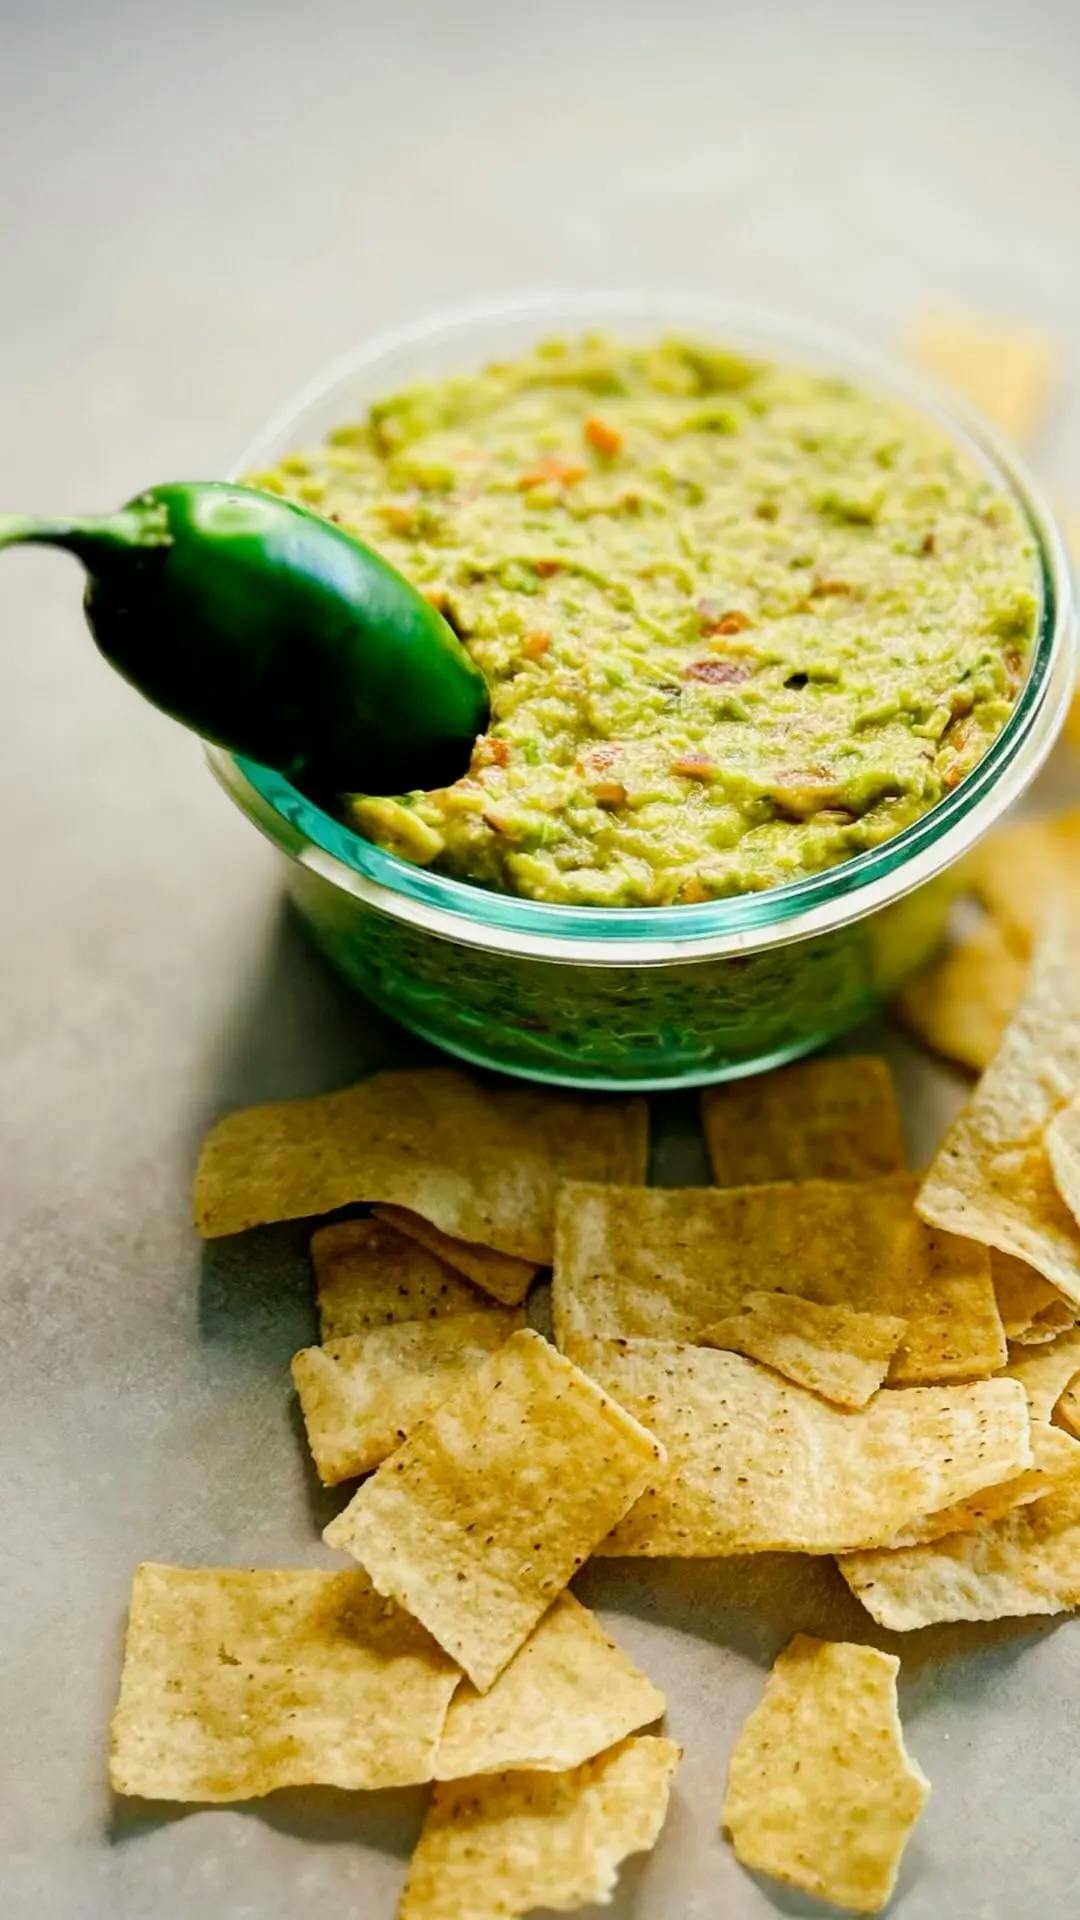 Picture for HOMEMADE GUACAMOLE